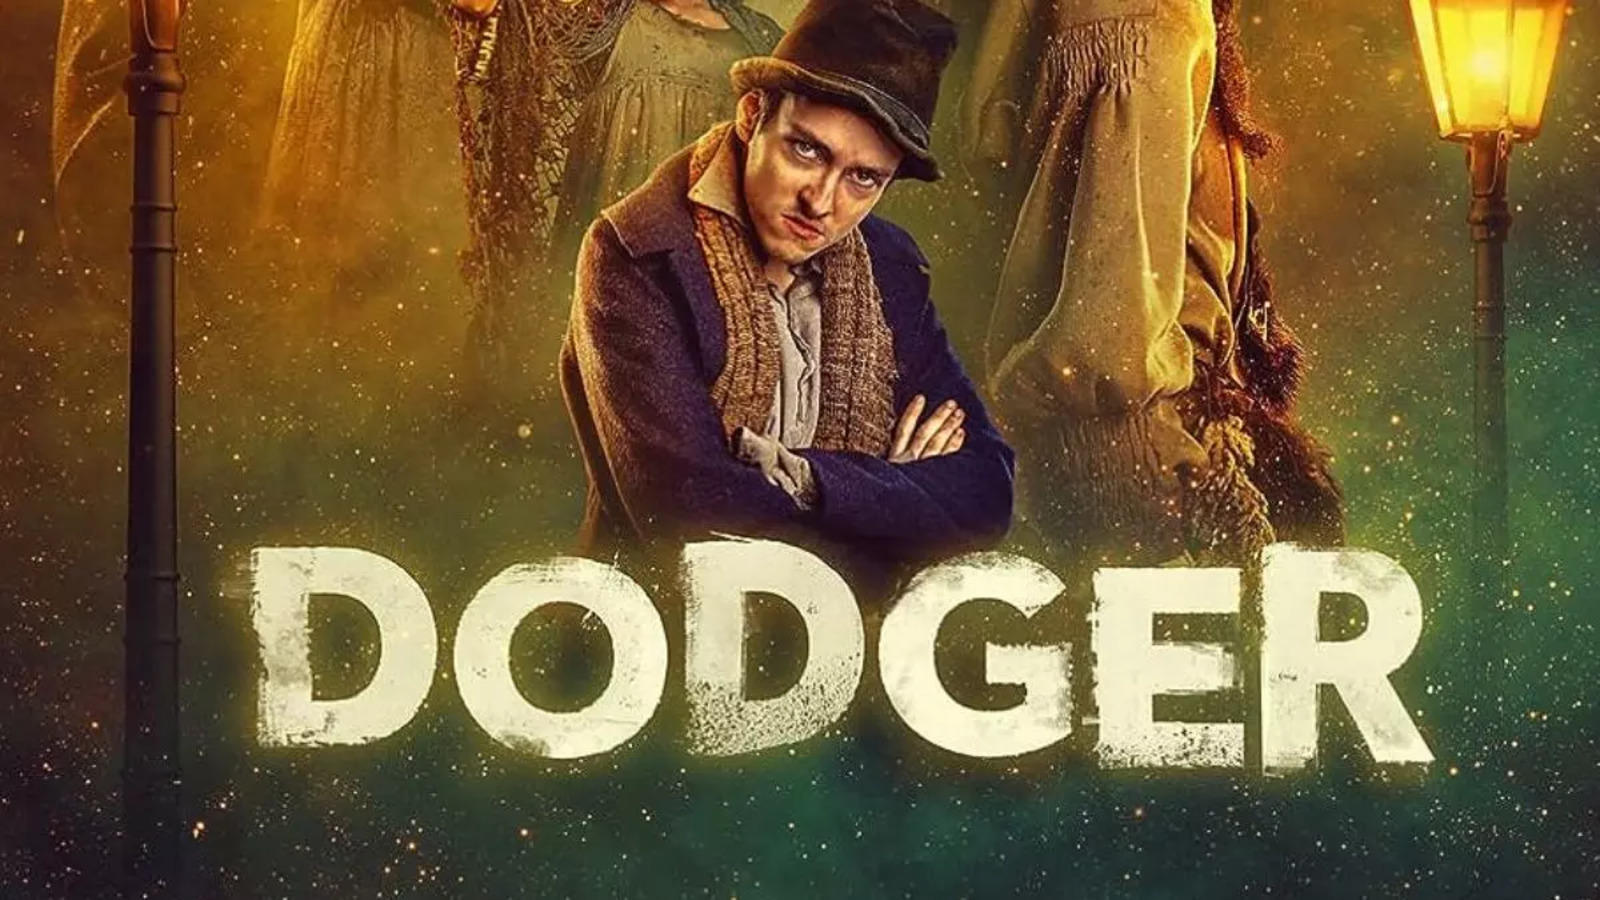 The Artful Dodger: 'The Artful Dodger': Know release date, cast, storyline, streaming platform and more Economic Times